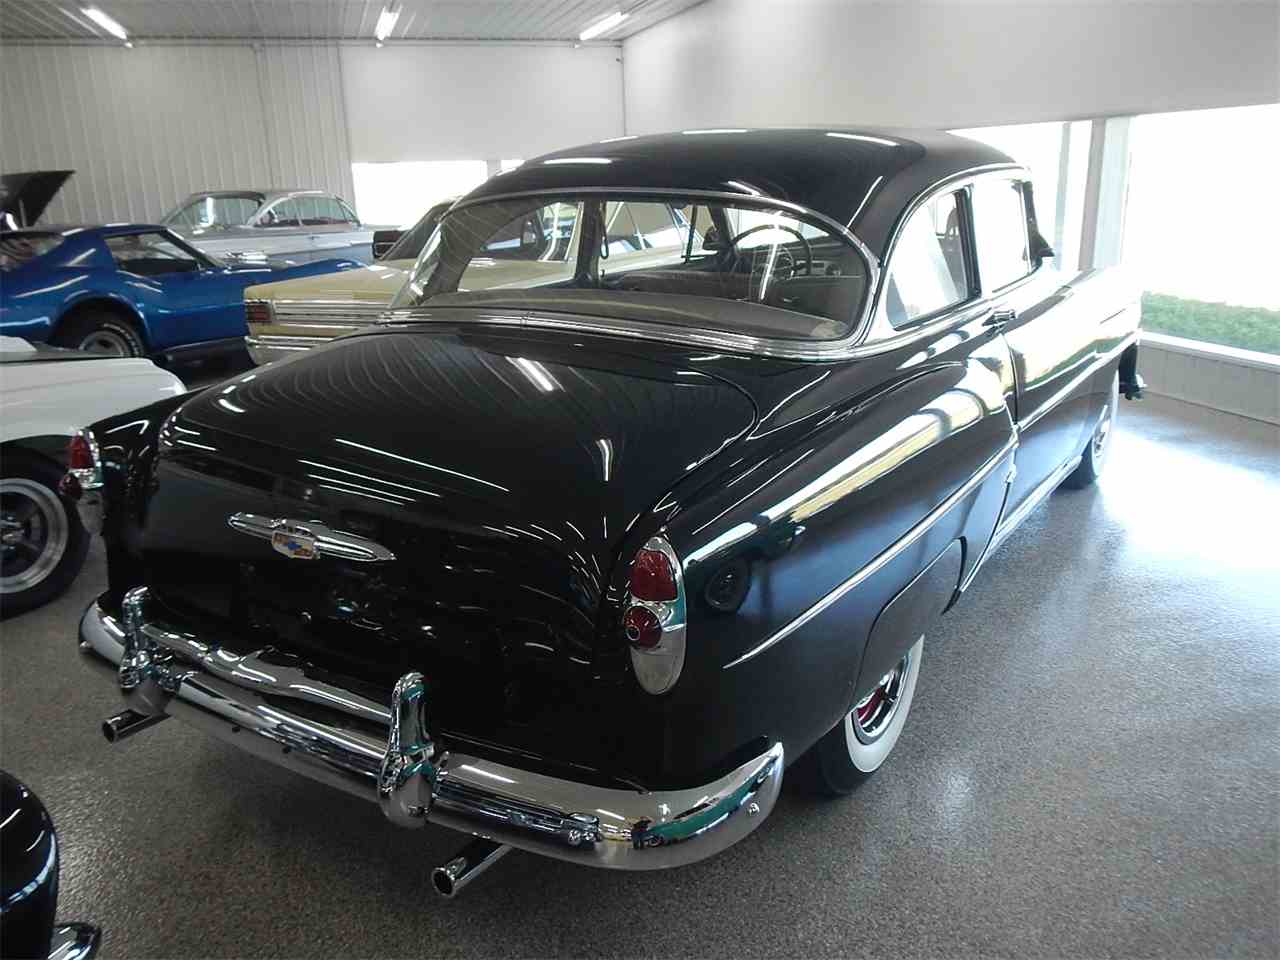 1953 Chevrolet 210 For Sale Classiccars Cc 957736 for Classic Cars Celina Ohio